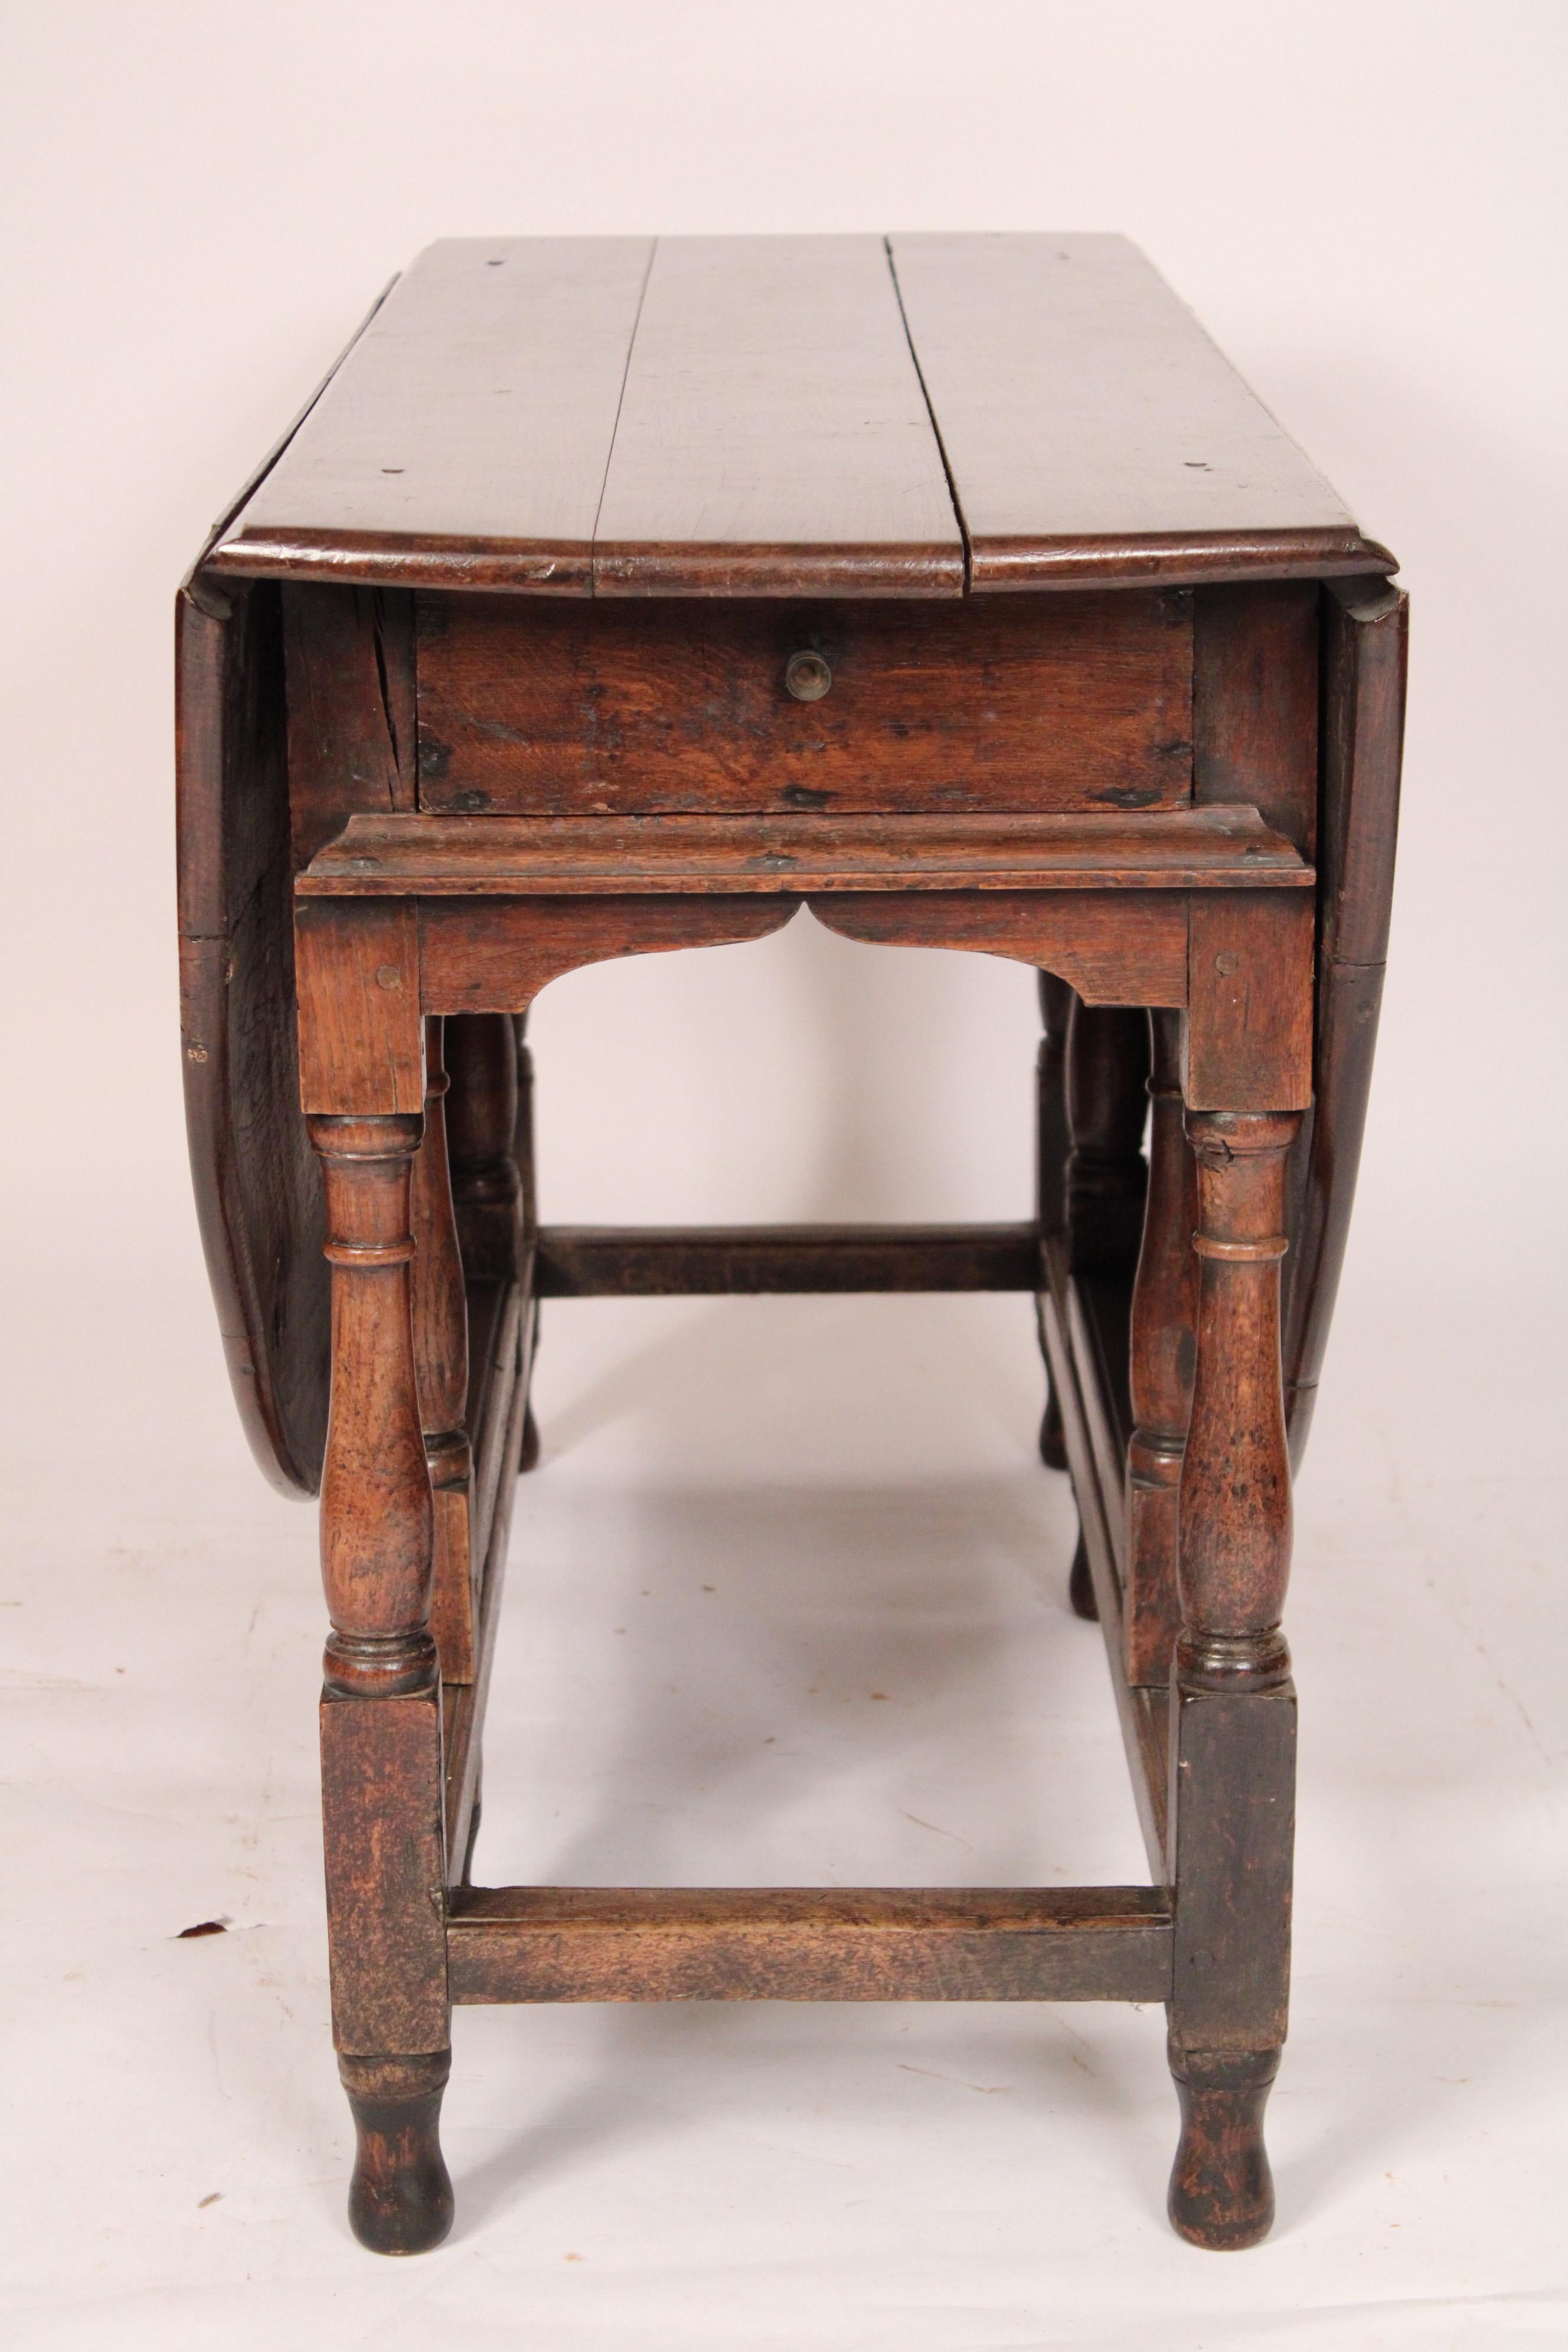 Antique William & Mary style oak gate leg table, 18th century. Dimensions of top when drop leaves are raised depth 52.5